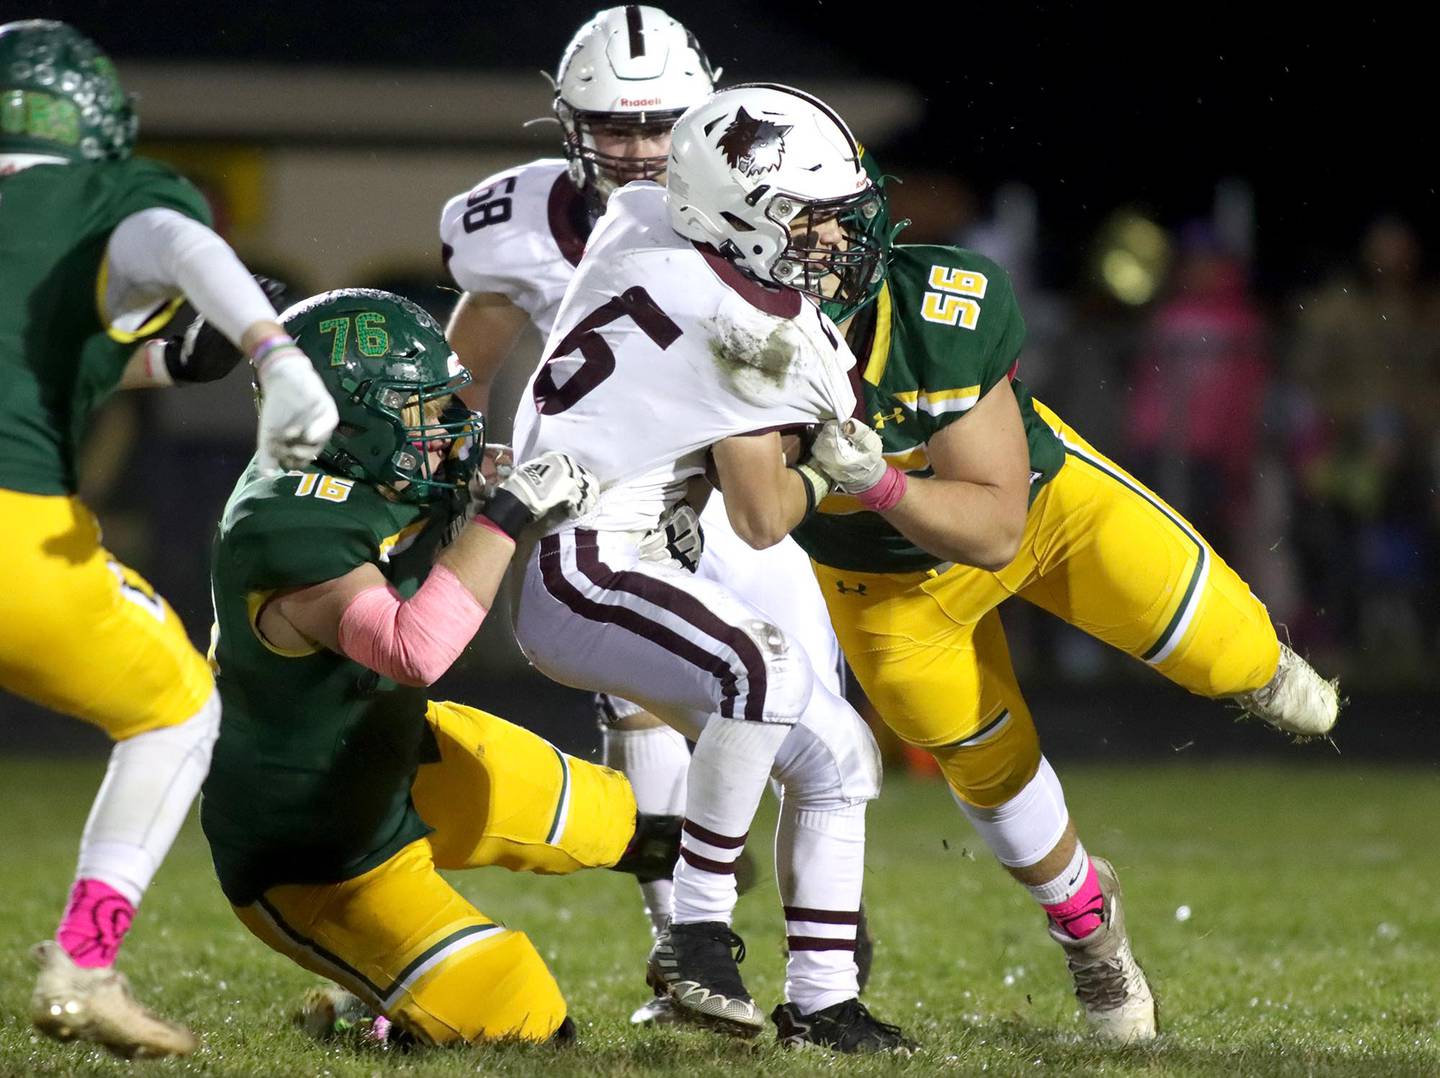 Crystal Lake South’s Nate Compere, left, and Andy Burburija, right, bring down Prairie Ridge’s Luke Vanderwiel in varsity football action at Ken Bruhn Field on the campus of Crystal Lake South Friday evening.